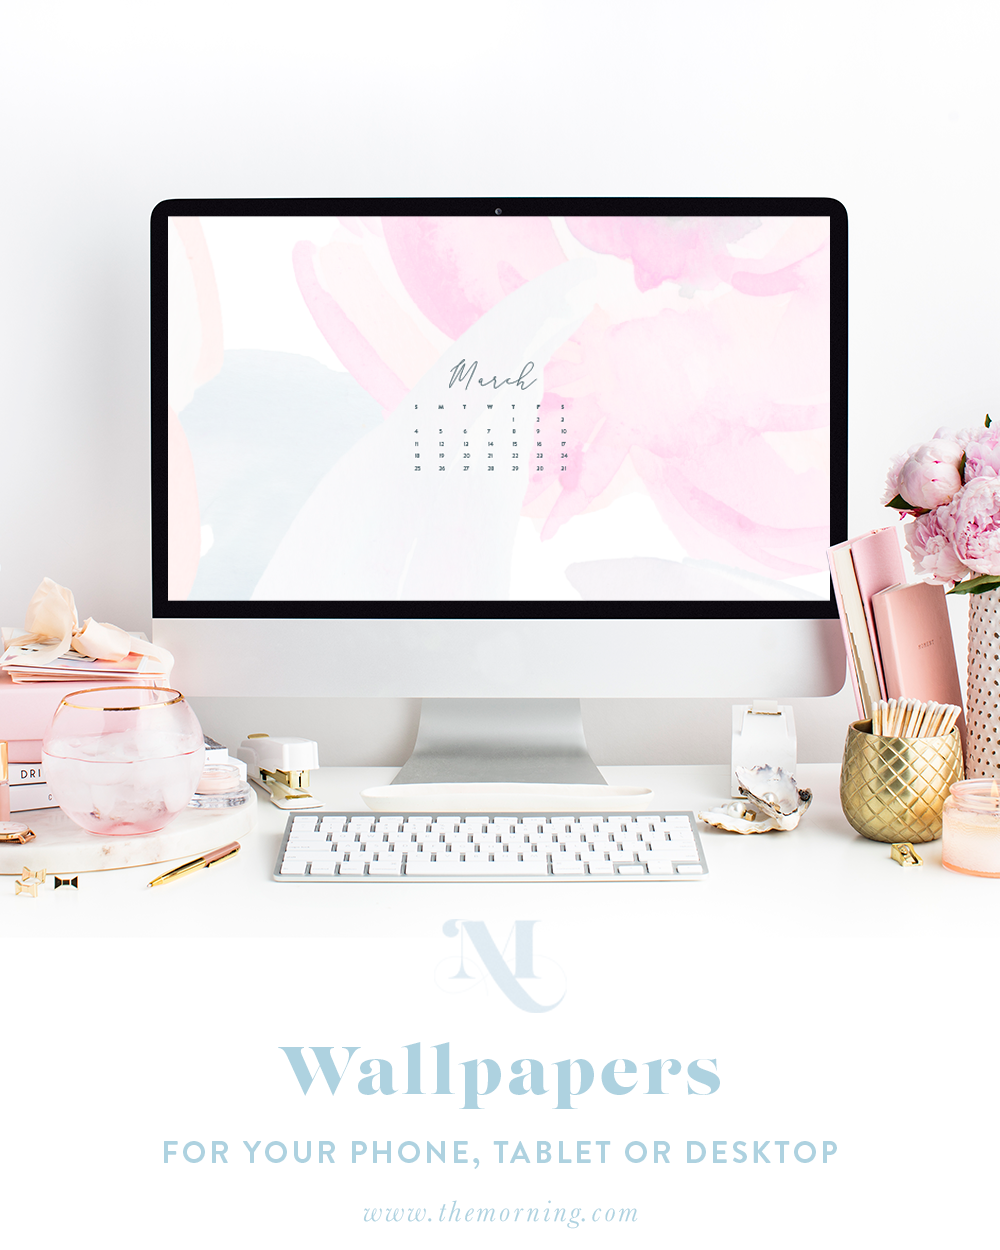 "God brings light to my darkness." Psalms 28:18 | Free Wallpapers | The Morning | A Community of hope for women finding joy after infant loss and miscarriage. | Ashlee Proffitt | The Morning | Miscarriage, Stillbirth, Infant Loss